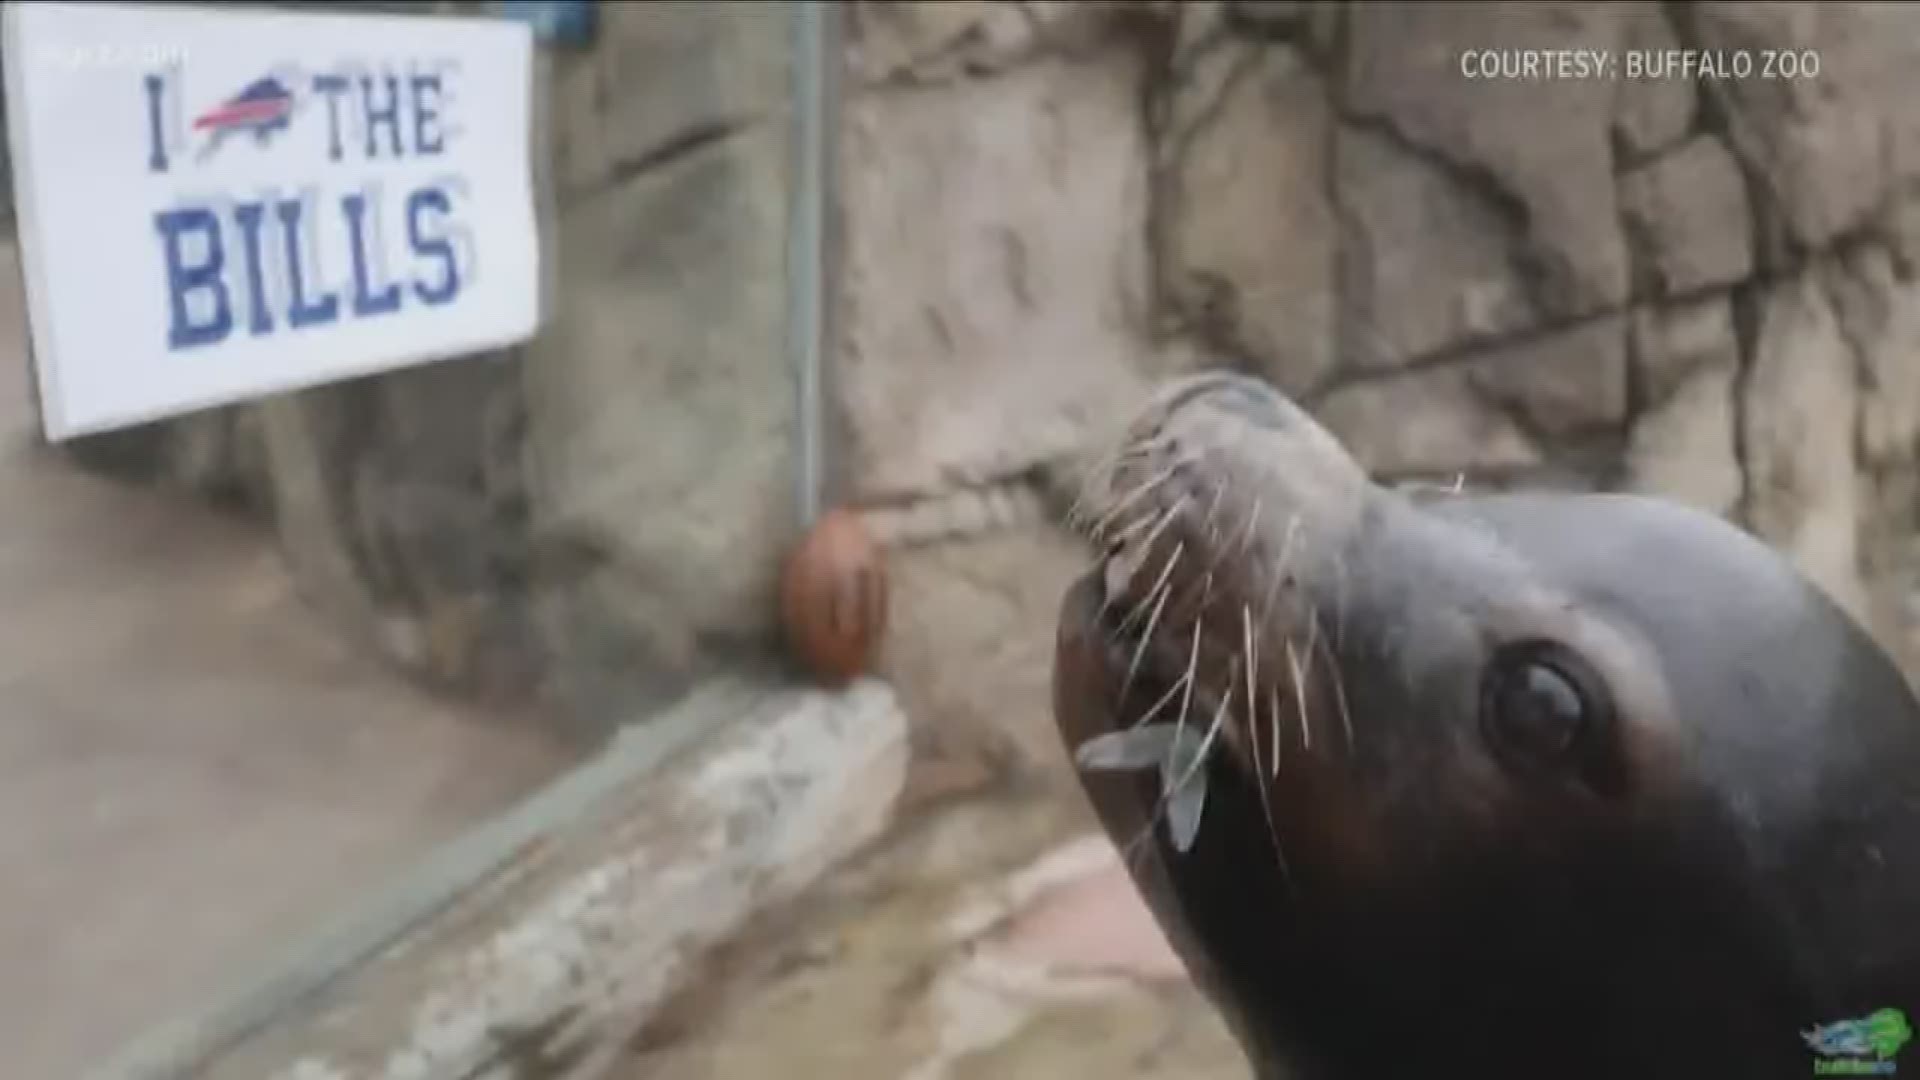 That's one of the Buffalo Zoo's California sea lions getting into the Bills spirit with the shout song.
The cove was decked out in some Bills signs and footballs.